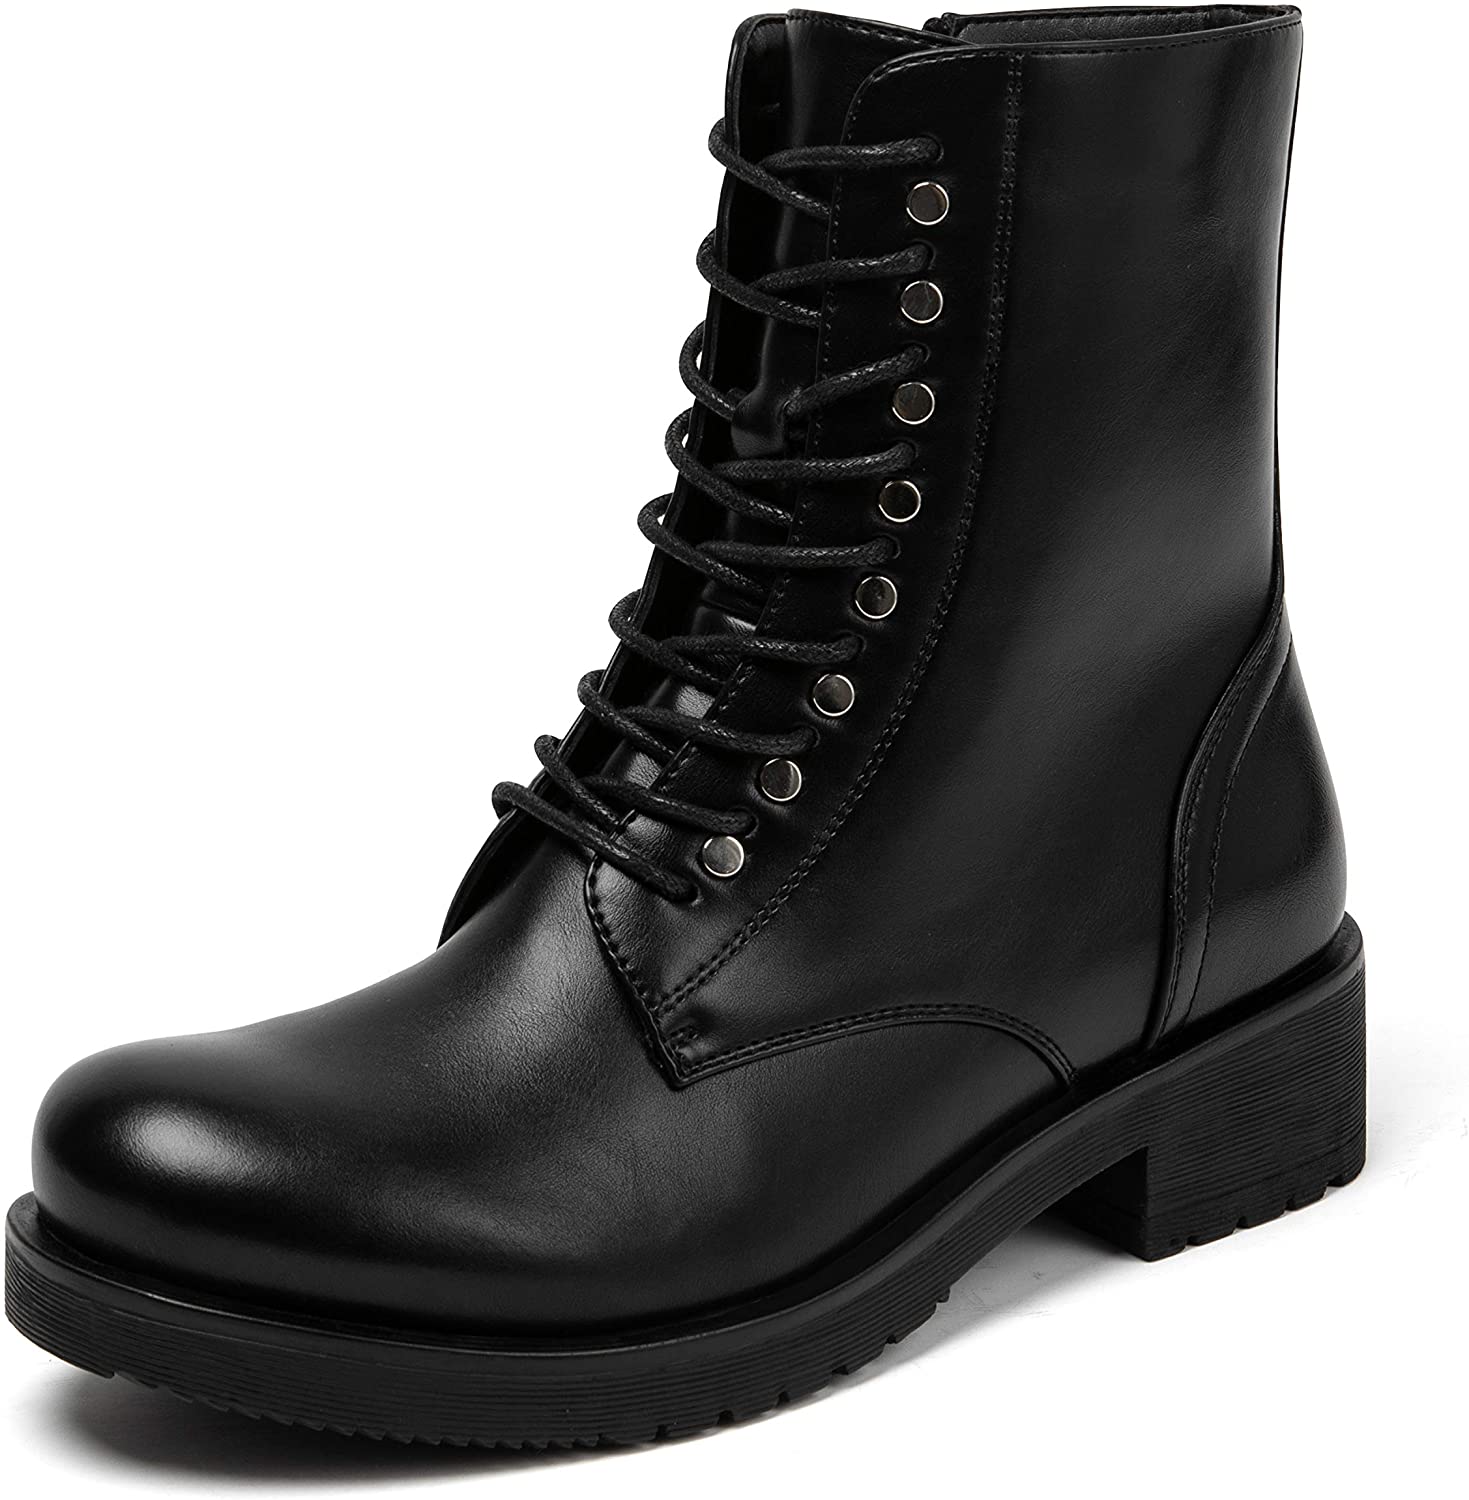 Womens Military Lace-Up Buckle Combat Boots Ankle Mid Calf Fold-Down Retro Shoes 